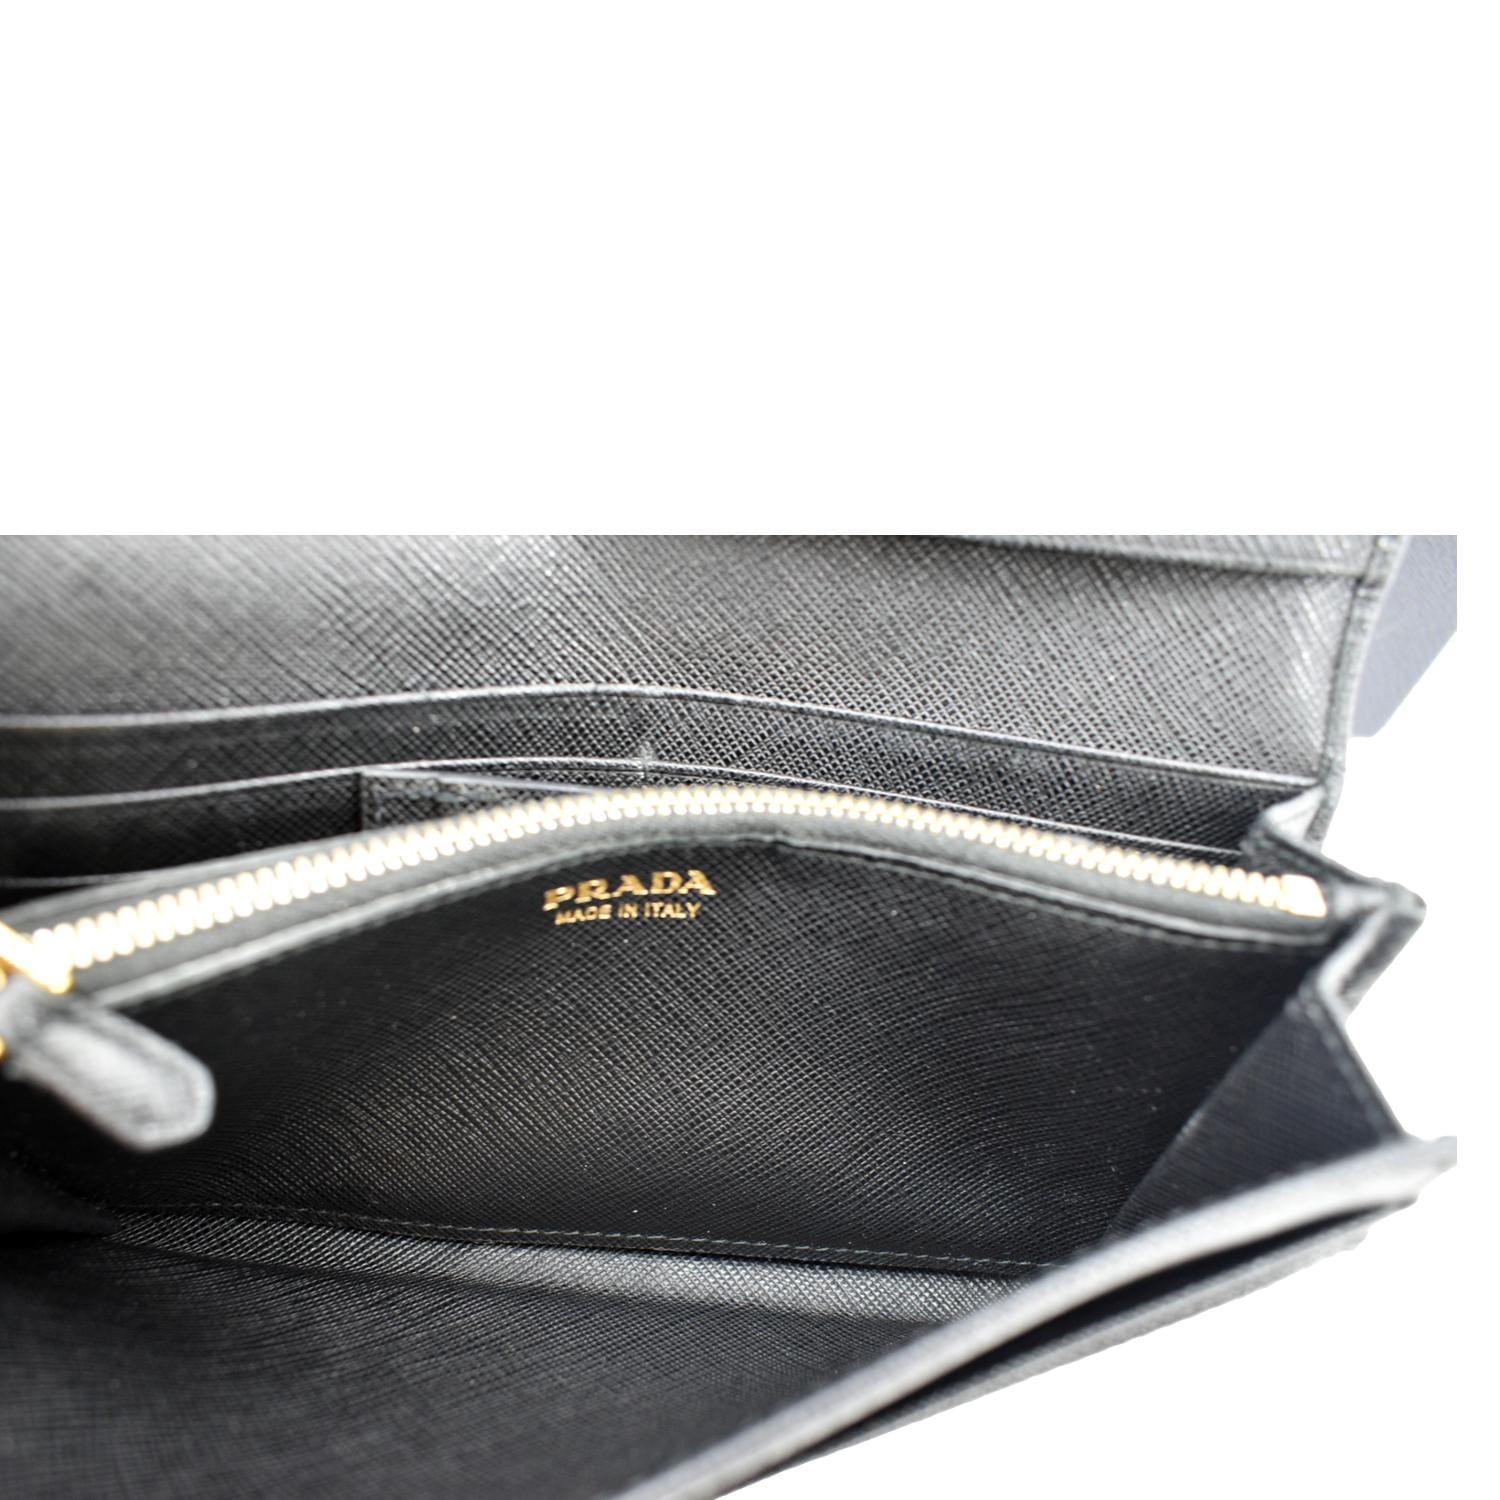 Prada Saffiano Leather Bow Wallet - The Palm Beach Trunk Designer Resale  and Luxury Consignment